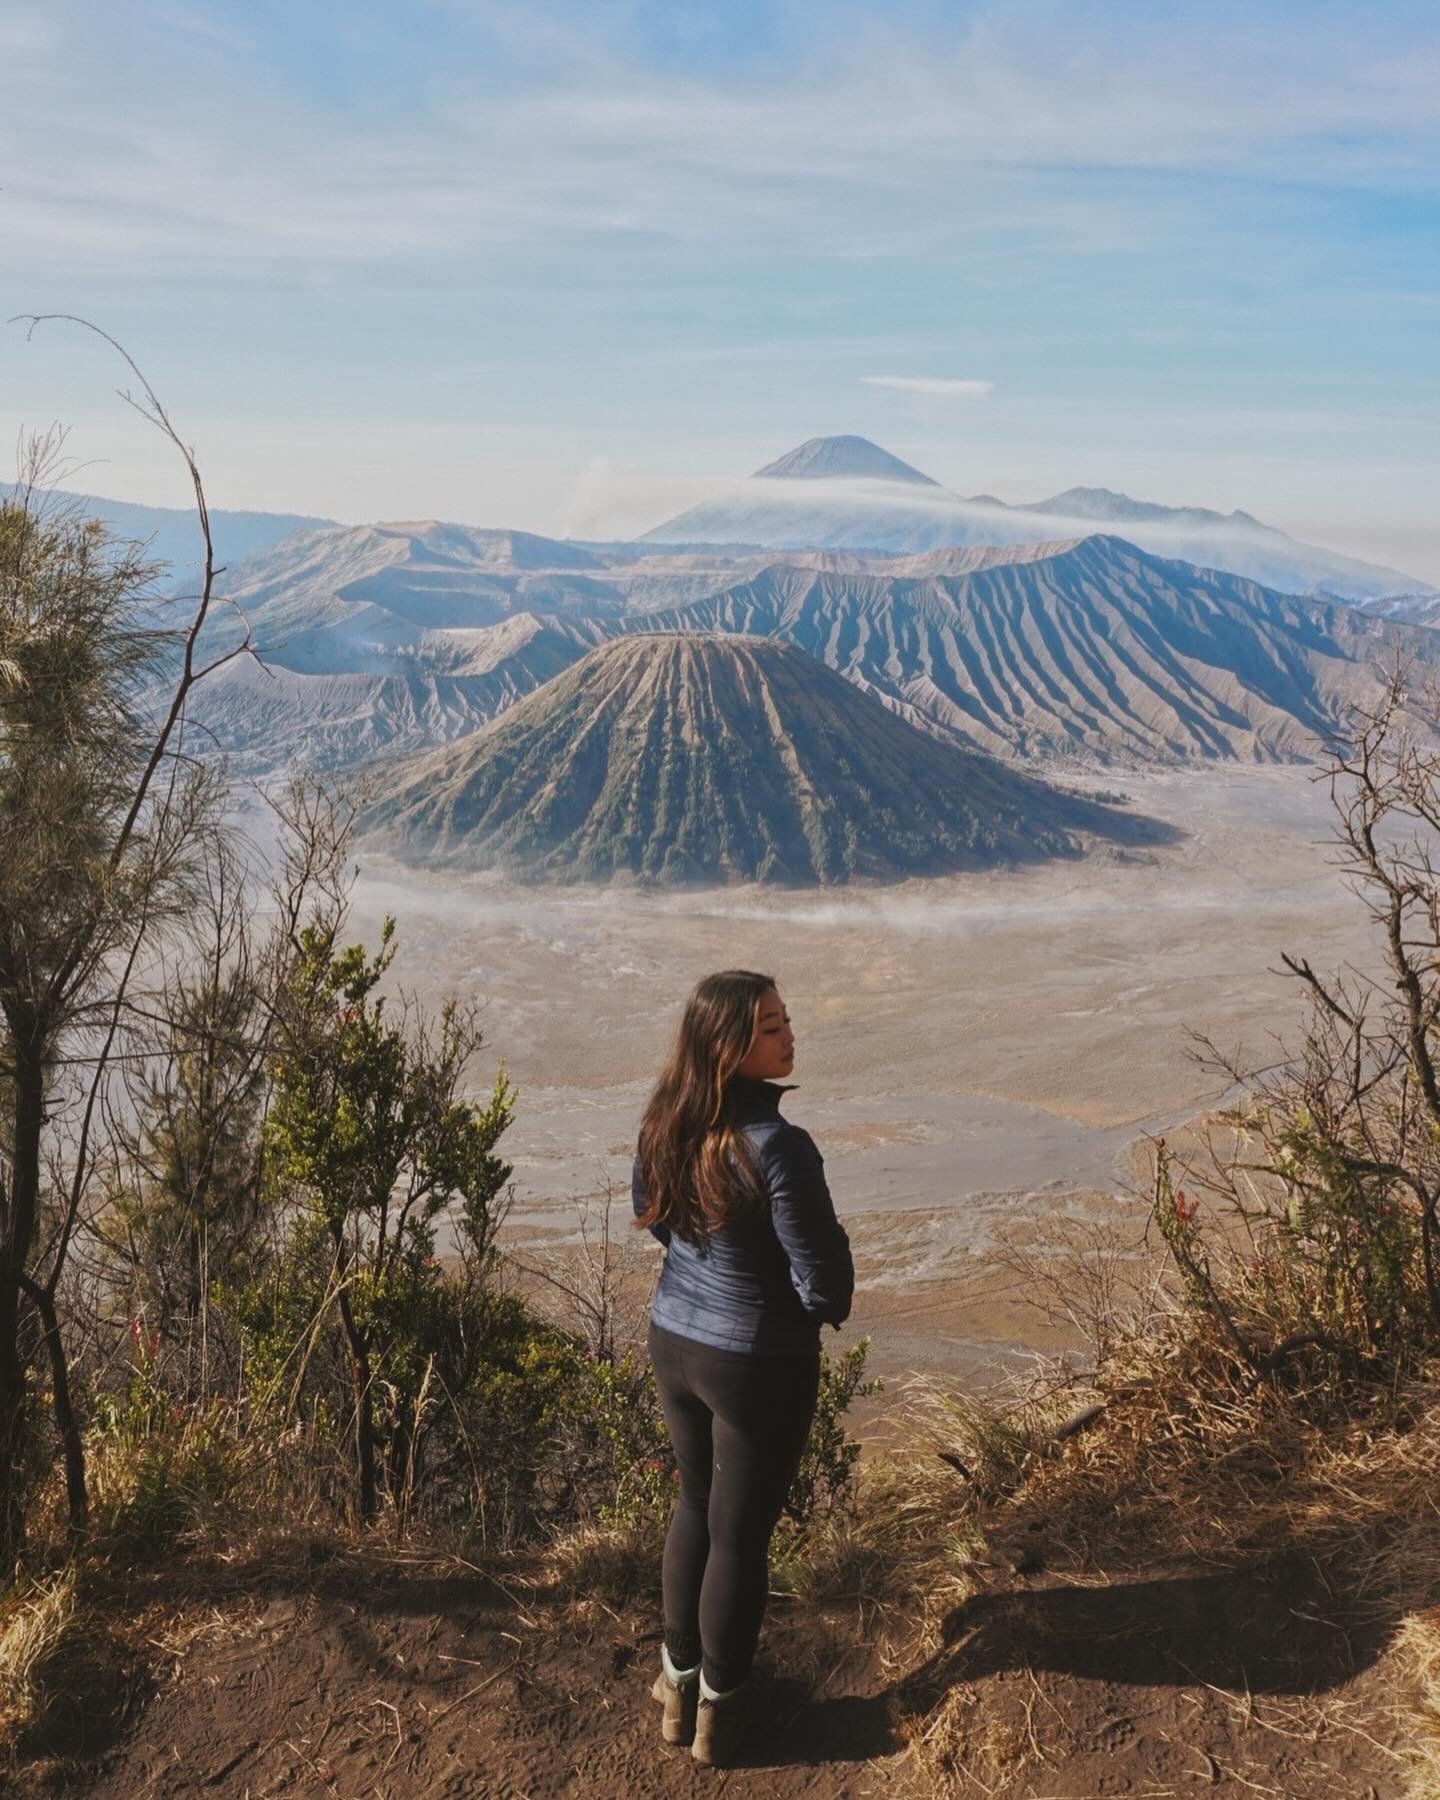 Mount Bromo in East Java, Indonesia is a  @unescoworldheritage site with an iconic volcano that is an adventure to get to! From Surabaya, you take a 3-4 hour winding drive, then in the middle of the night, climb in darkness to catch the first kiss of